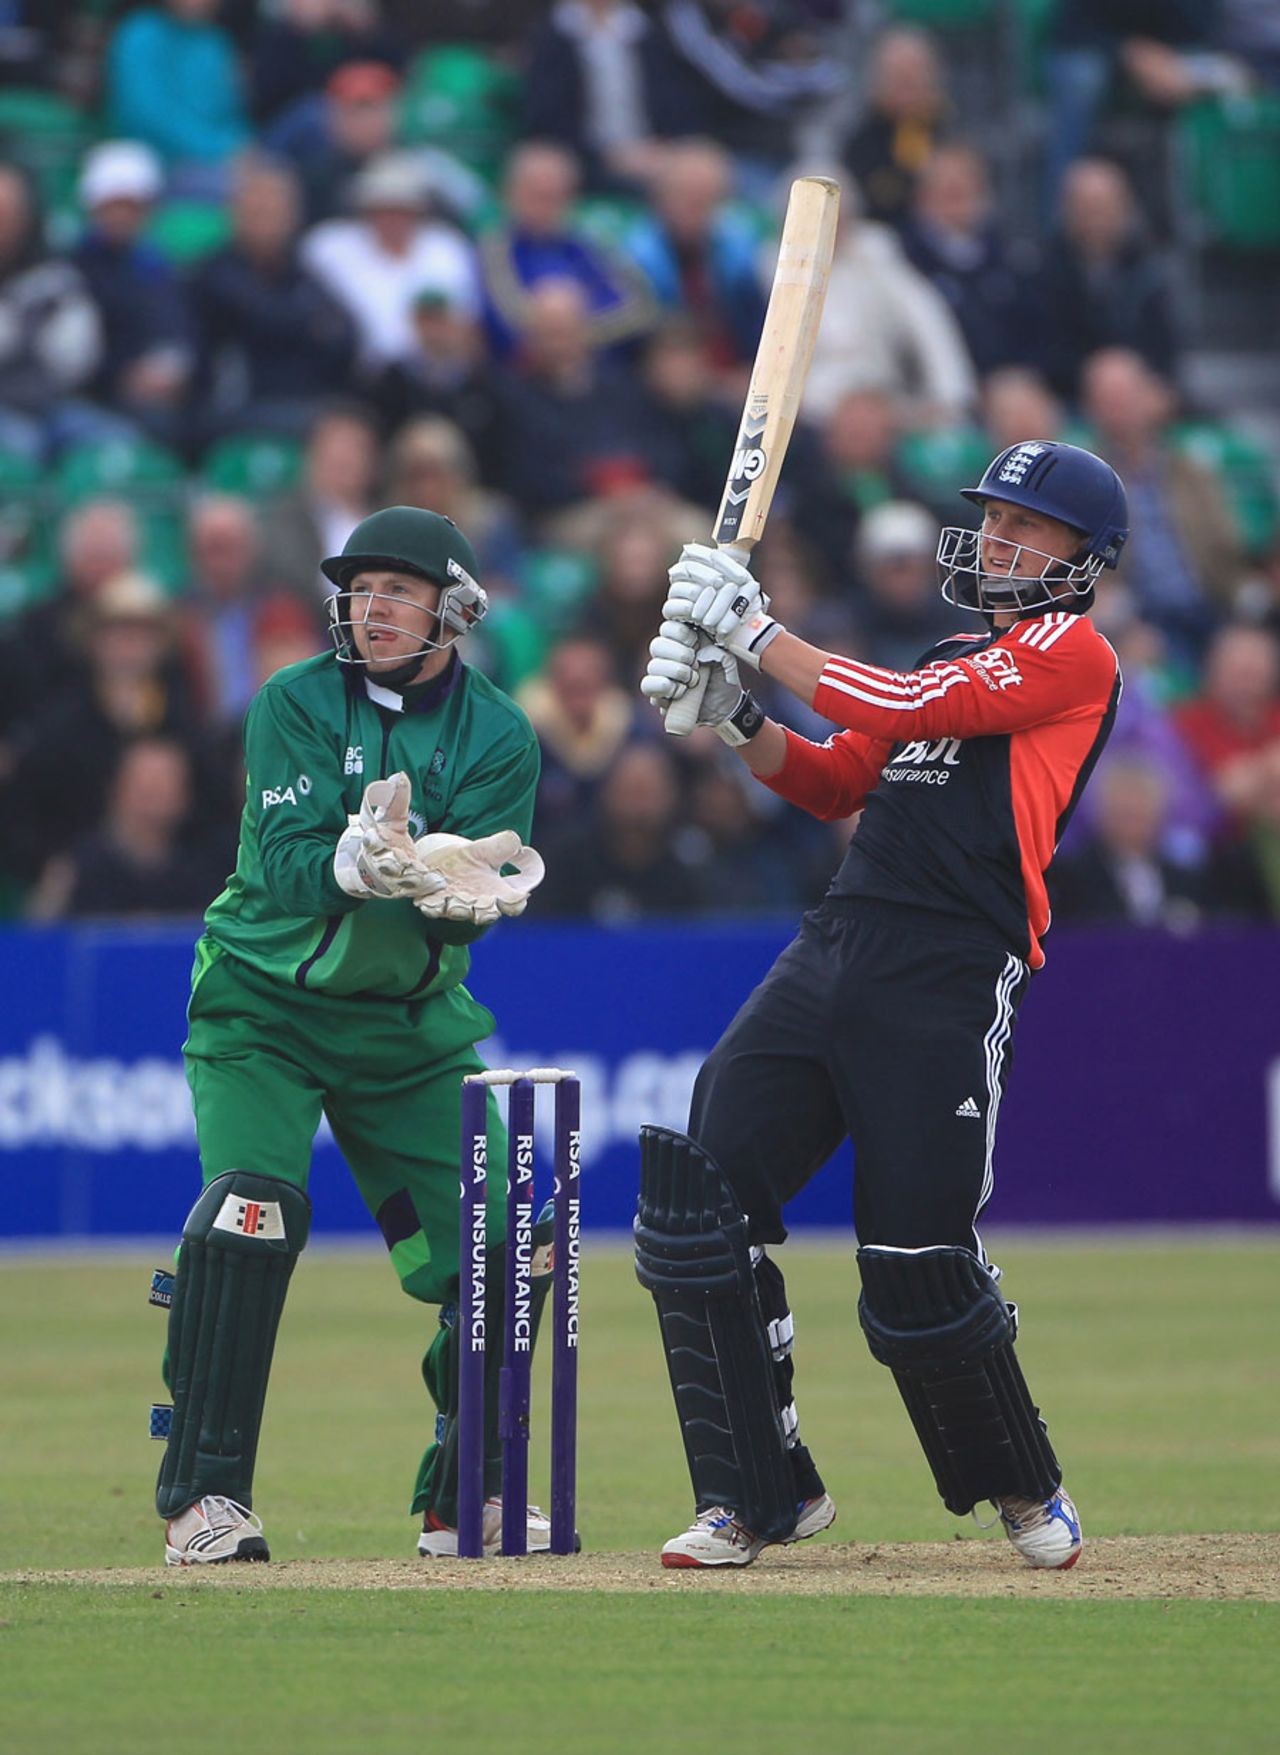 Scott Borthwick cracked a useful 15 from nine balls to boost England's innings, Ireland v England, only ODI, Clontarf, August 25, 2011